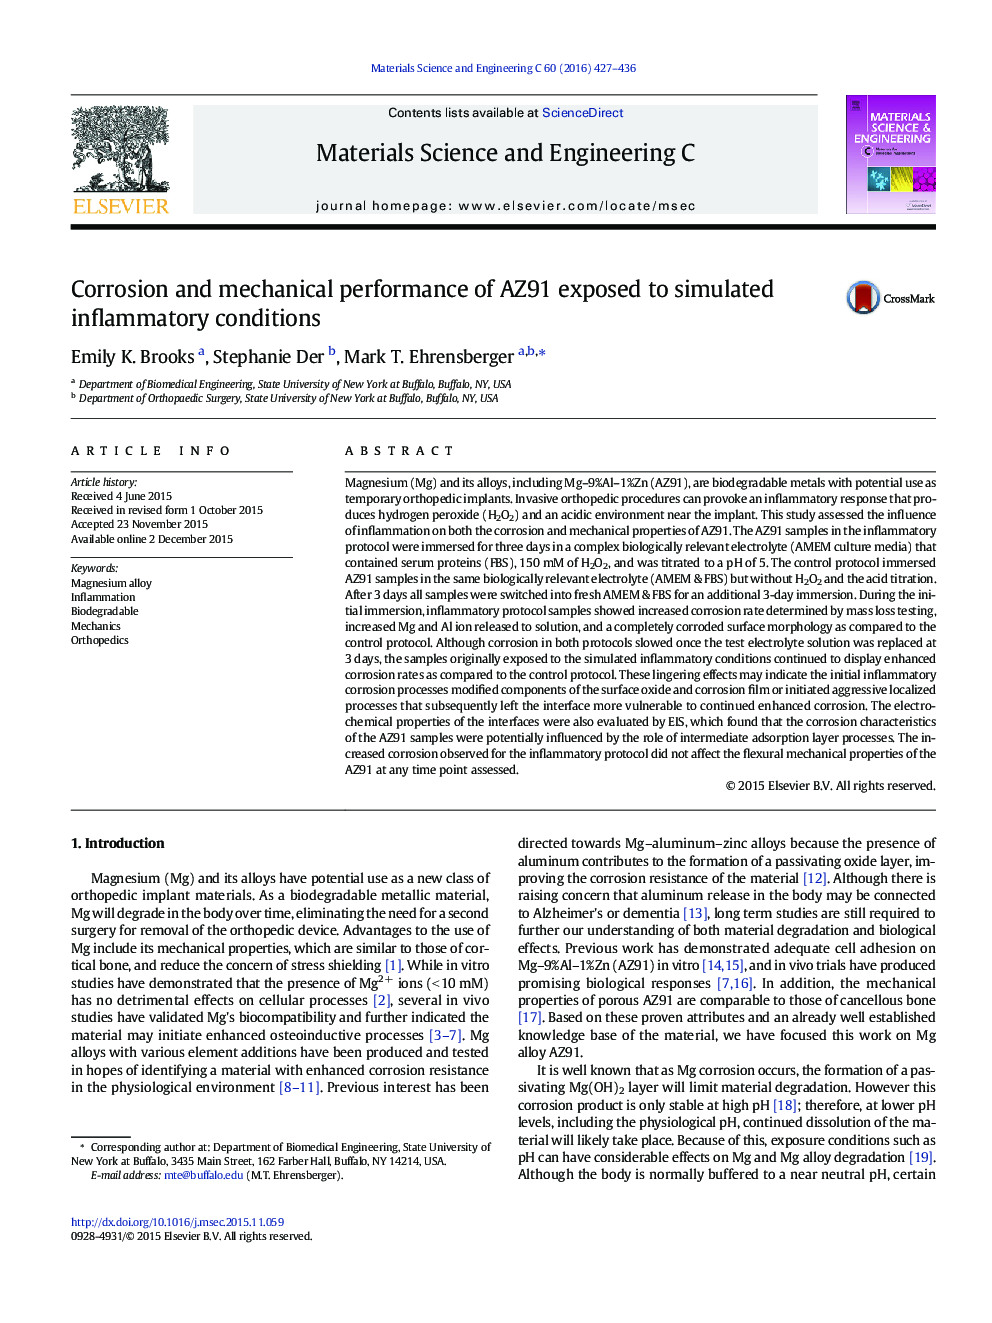 Corrosion and mechanical performance of AZ91 exposed to simulated inflammatory conditions